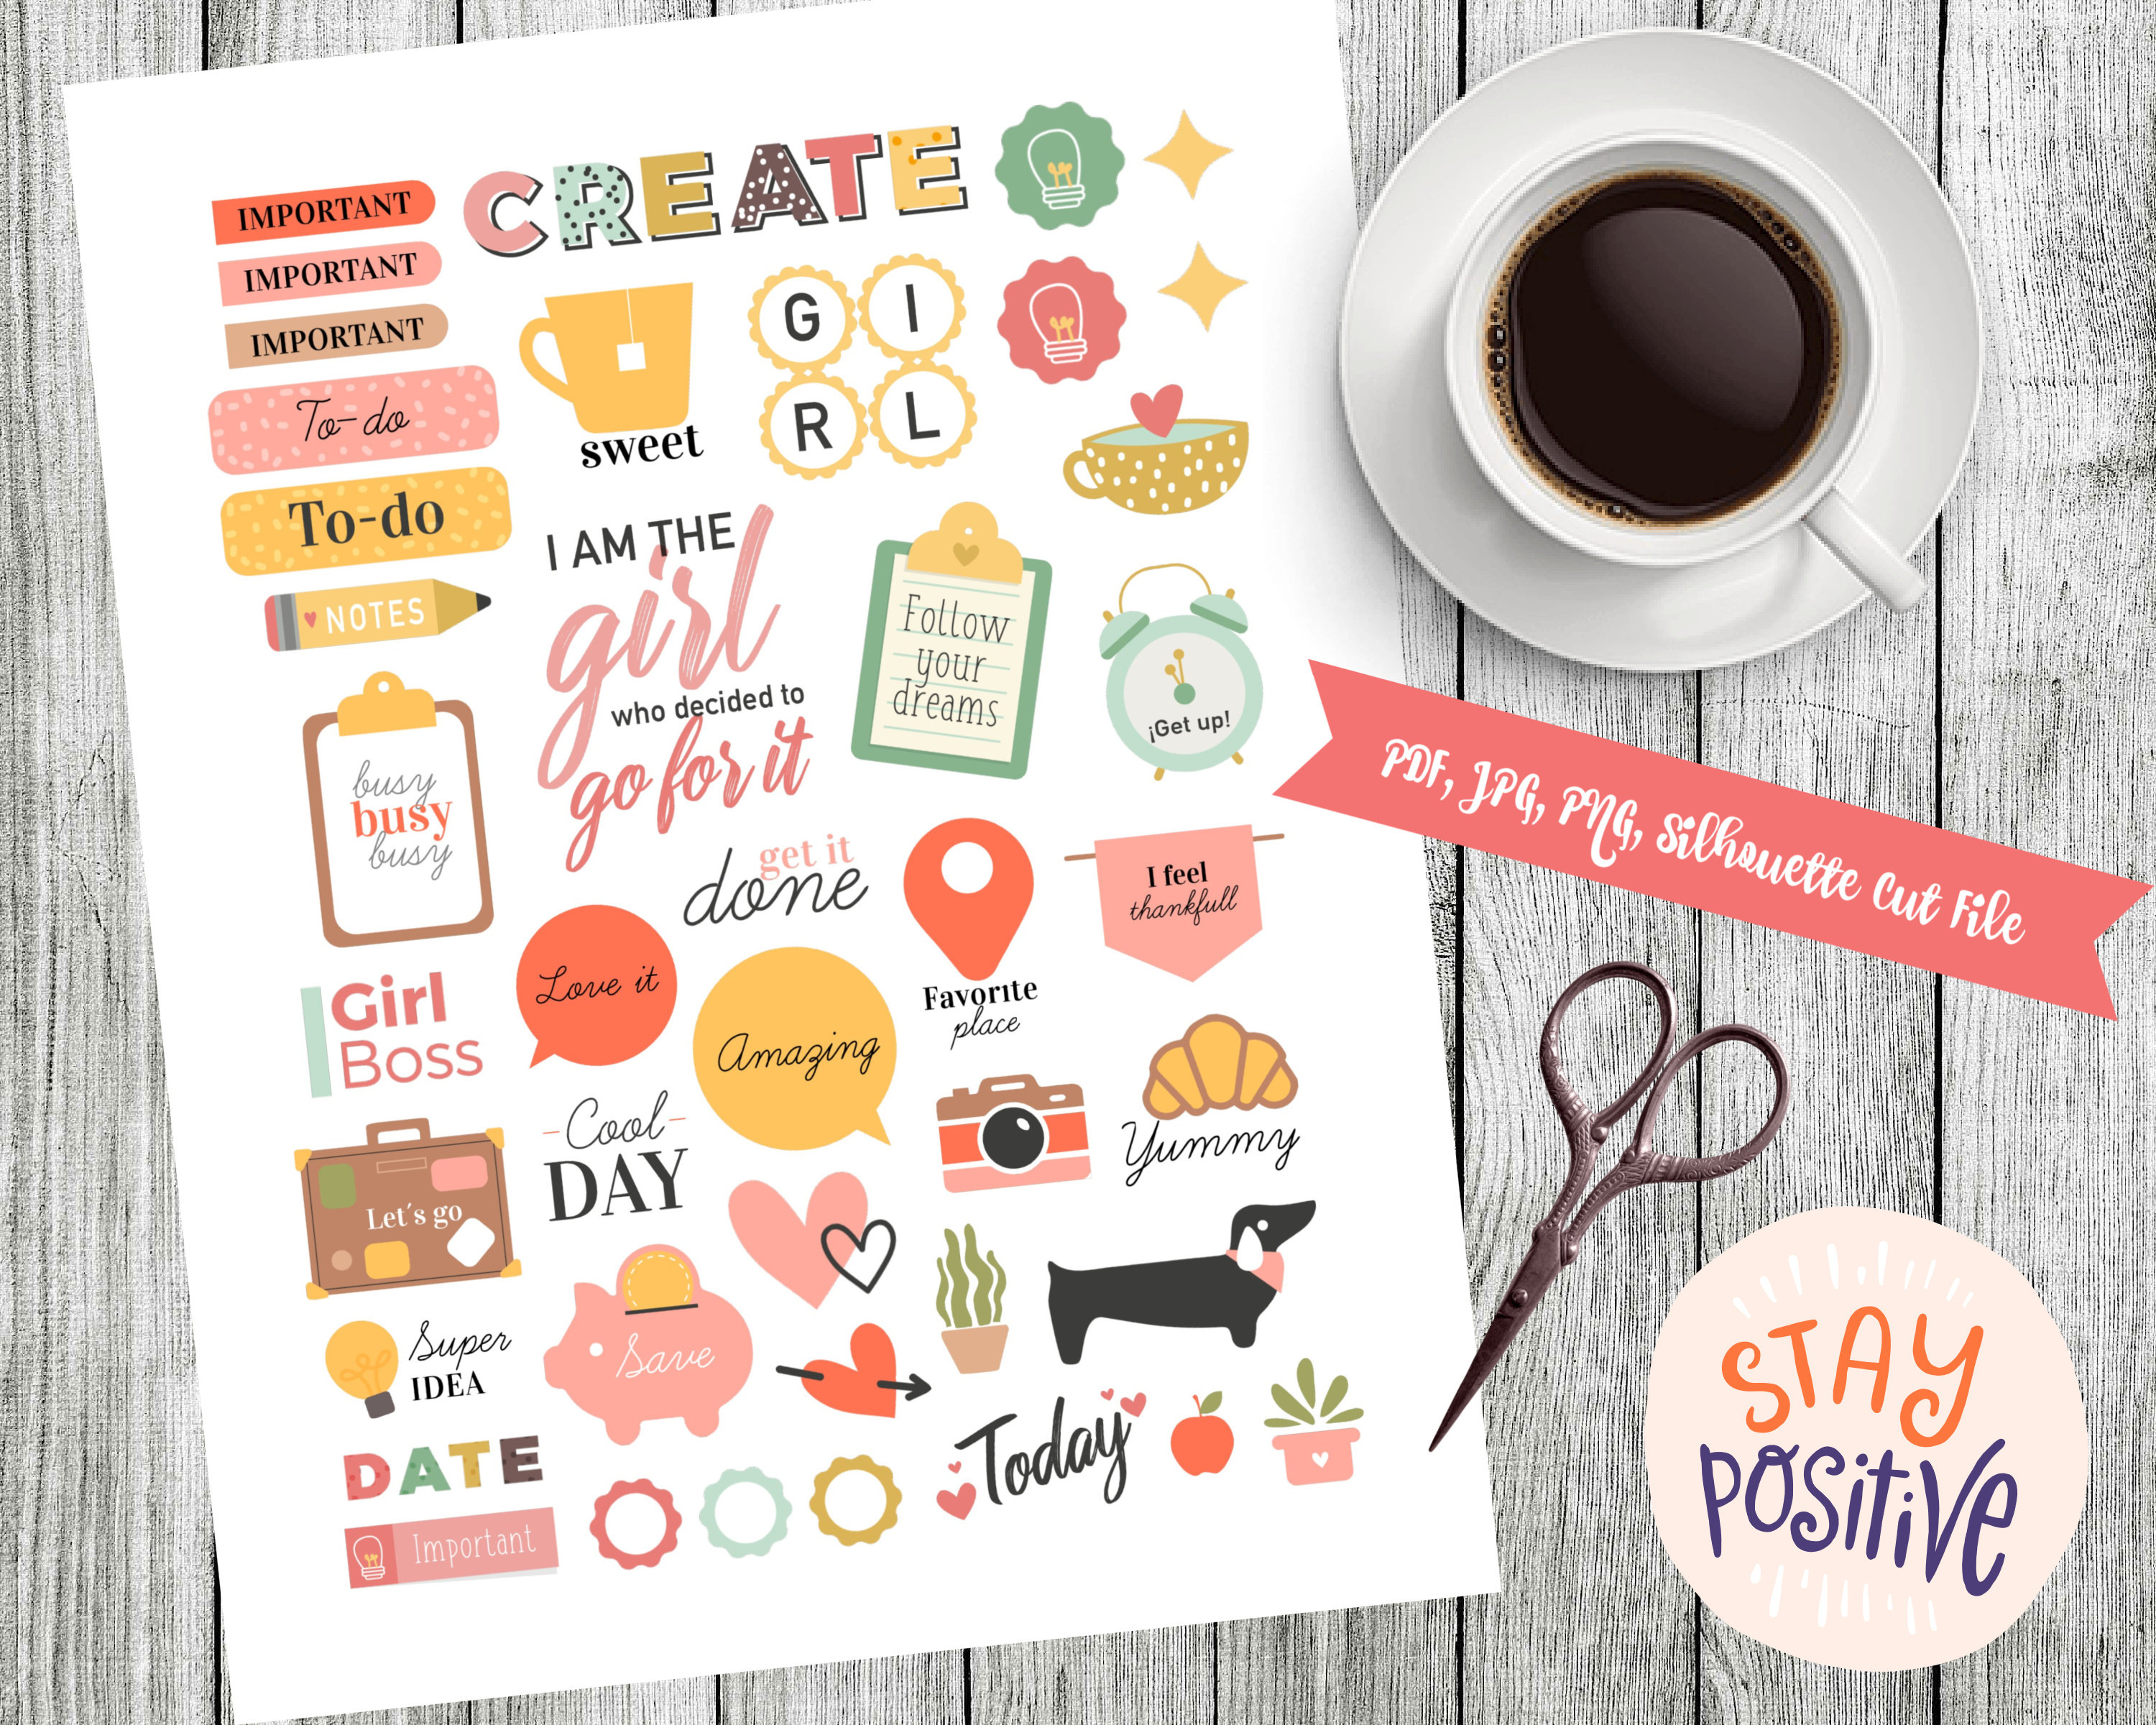 Mood Daily Stickers 8 Sheets of 240pcs Encourage Positive and Upward Stickers Hand Drawn Elements Plan Book Graffiti Scrap Book Planner Sticker